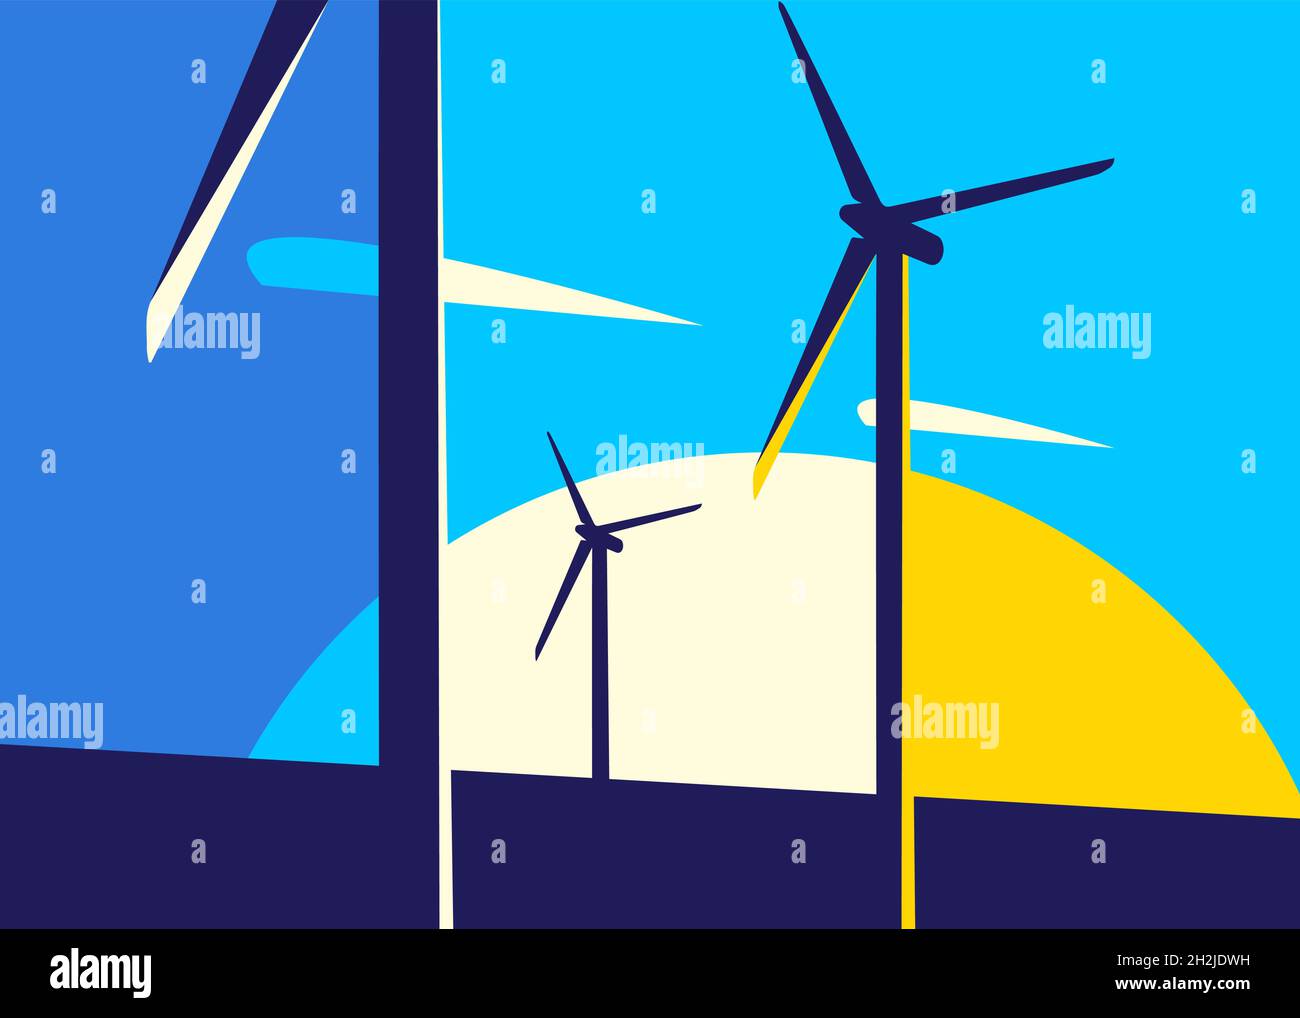 Banner with wind power stations. Placard design in abstract style. Stock Vector